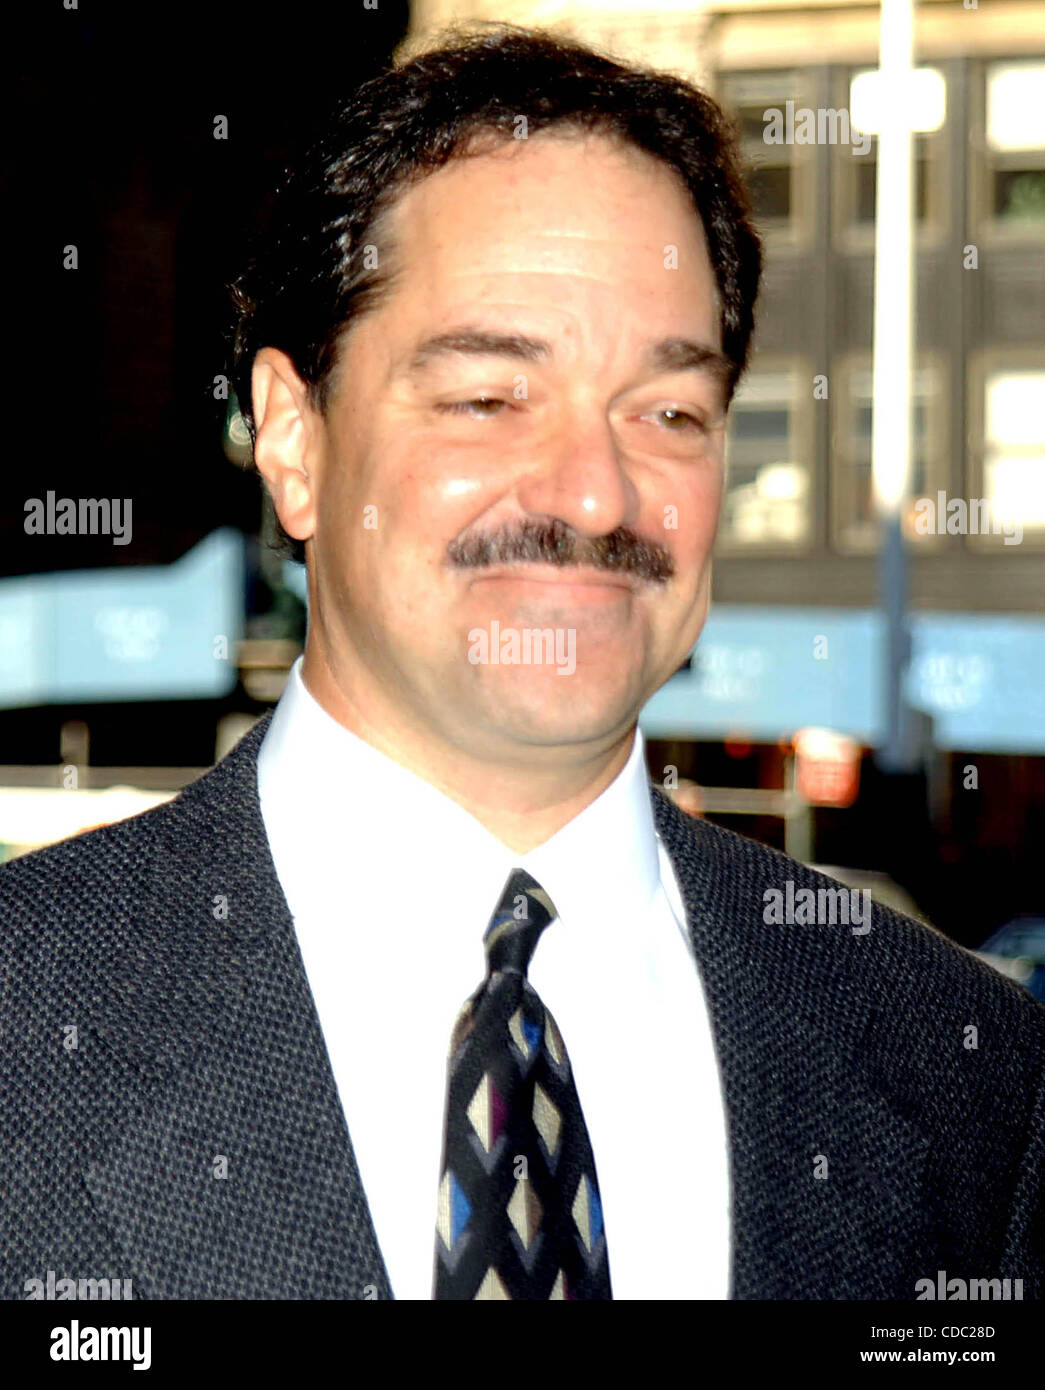 K33170AR.TYCO EMBEZZLEMENT TRIAL AT THE NEW YORK CRIMINAL COURT IN NEW YORK New York.9/30/2003.    /   2003.FRANK QUATTRONE ON TRIAL FOR OBSTRUCTION OF JUSTICE AND WITNESS OF TAMPERING(Credit Image: Â© Andrea Renault/Globe Photos/ZUMAPRESS.com) Stock Photo